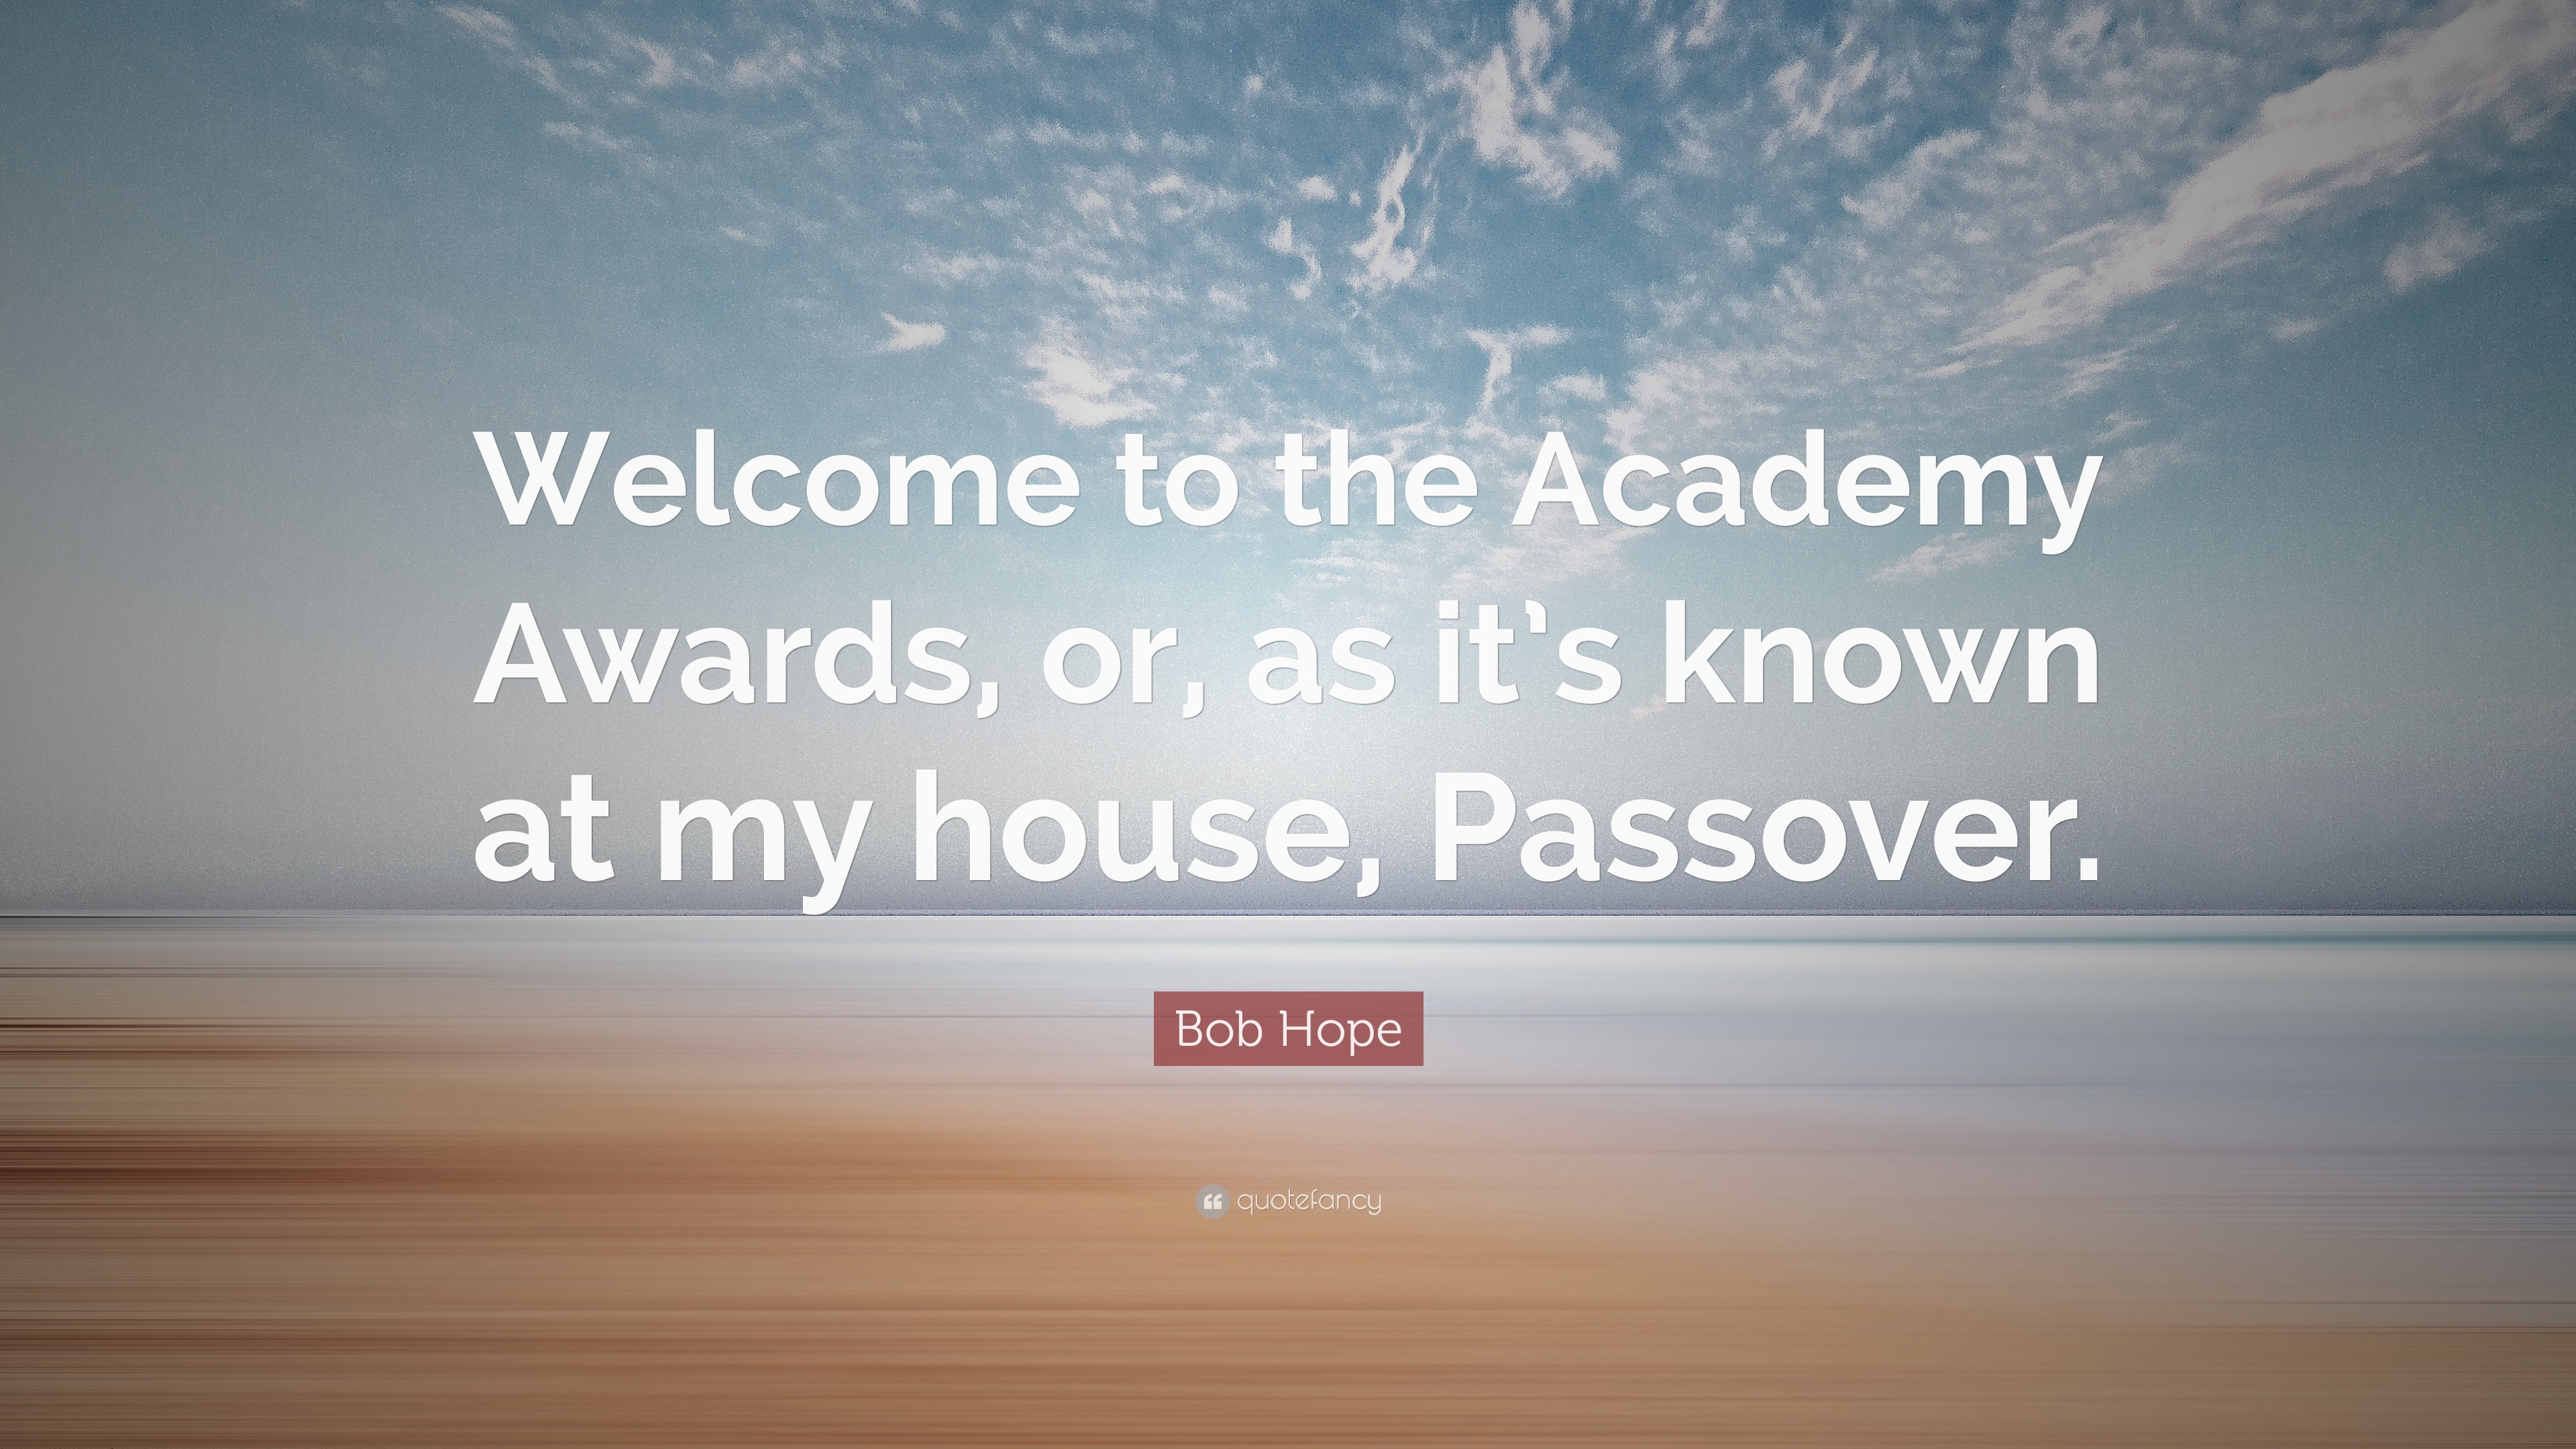 3840x2160 Bob Hope Quote: “Welcome to the Academy Awards, or, as it's known